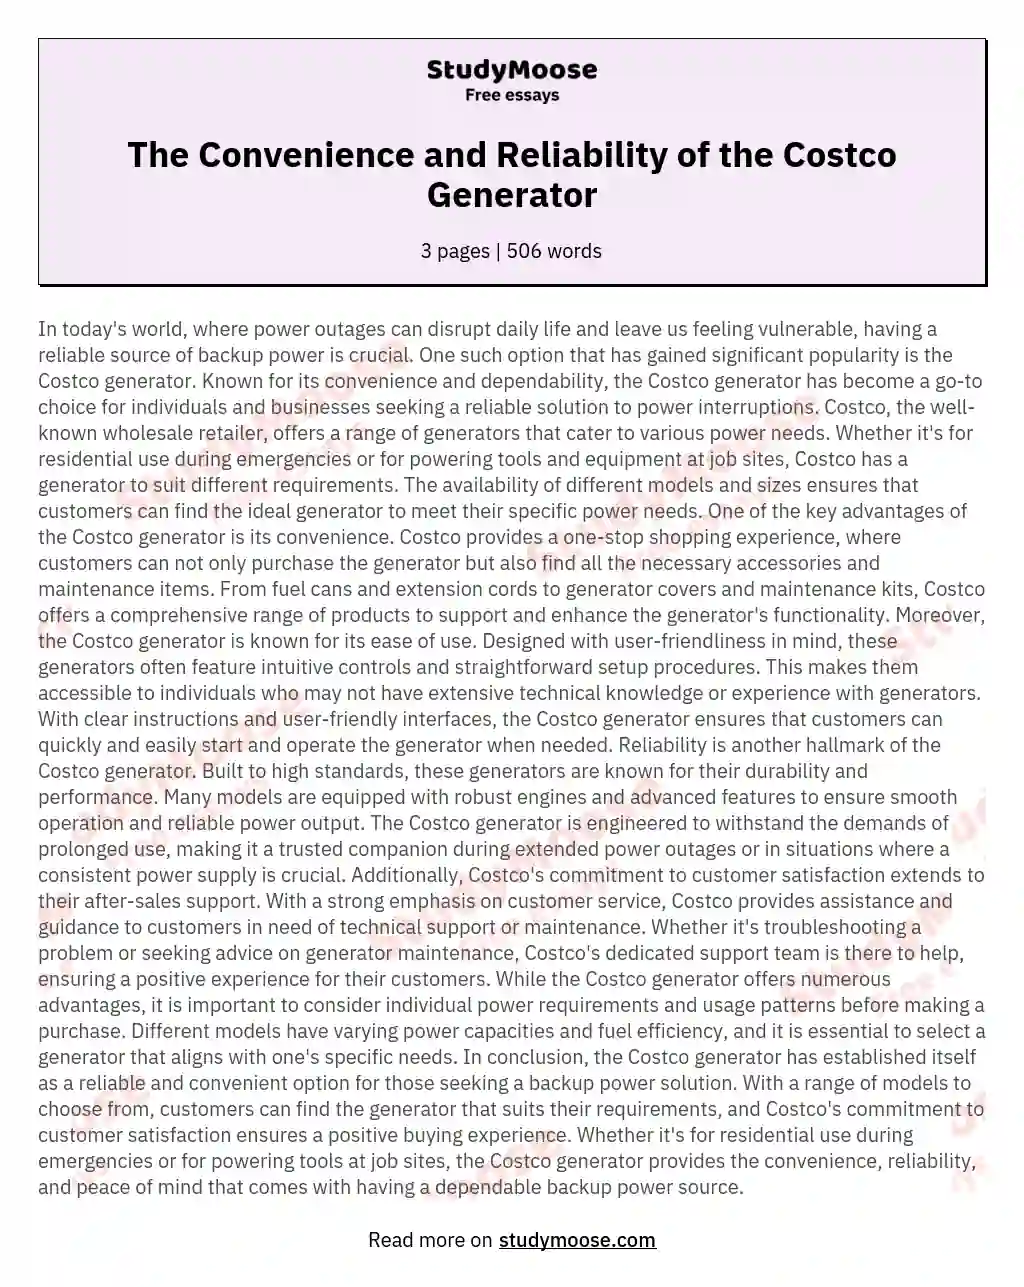 The Convenience and Reliability of the Costco Generator essay